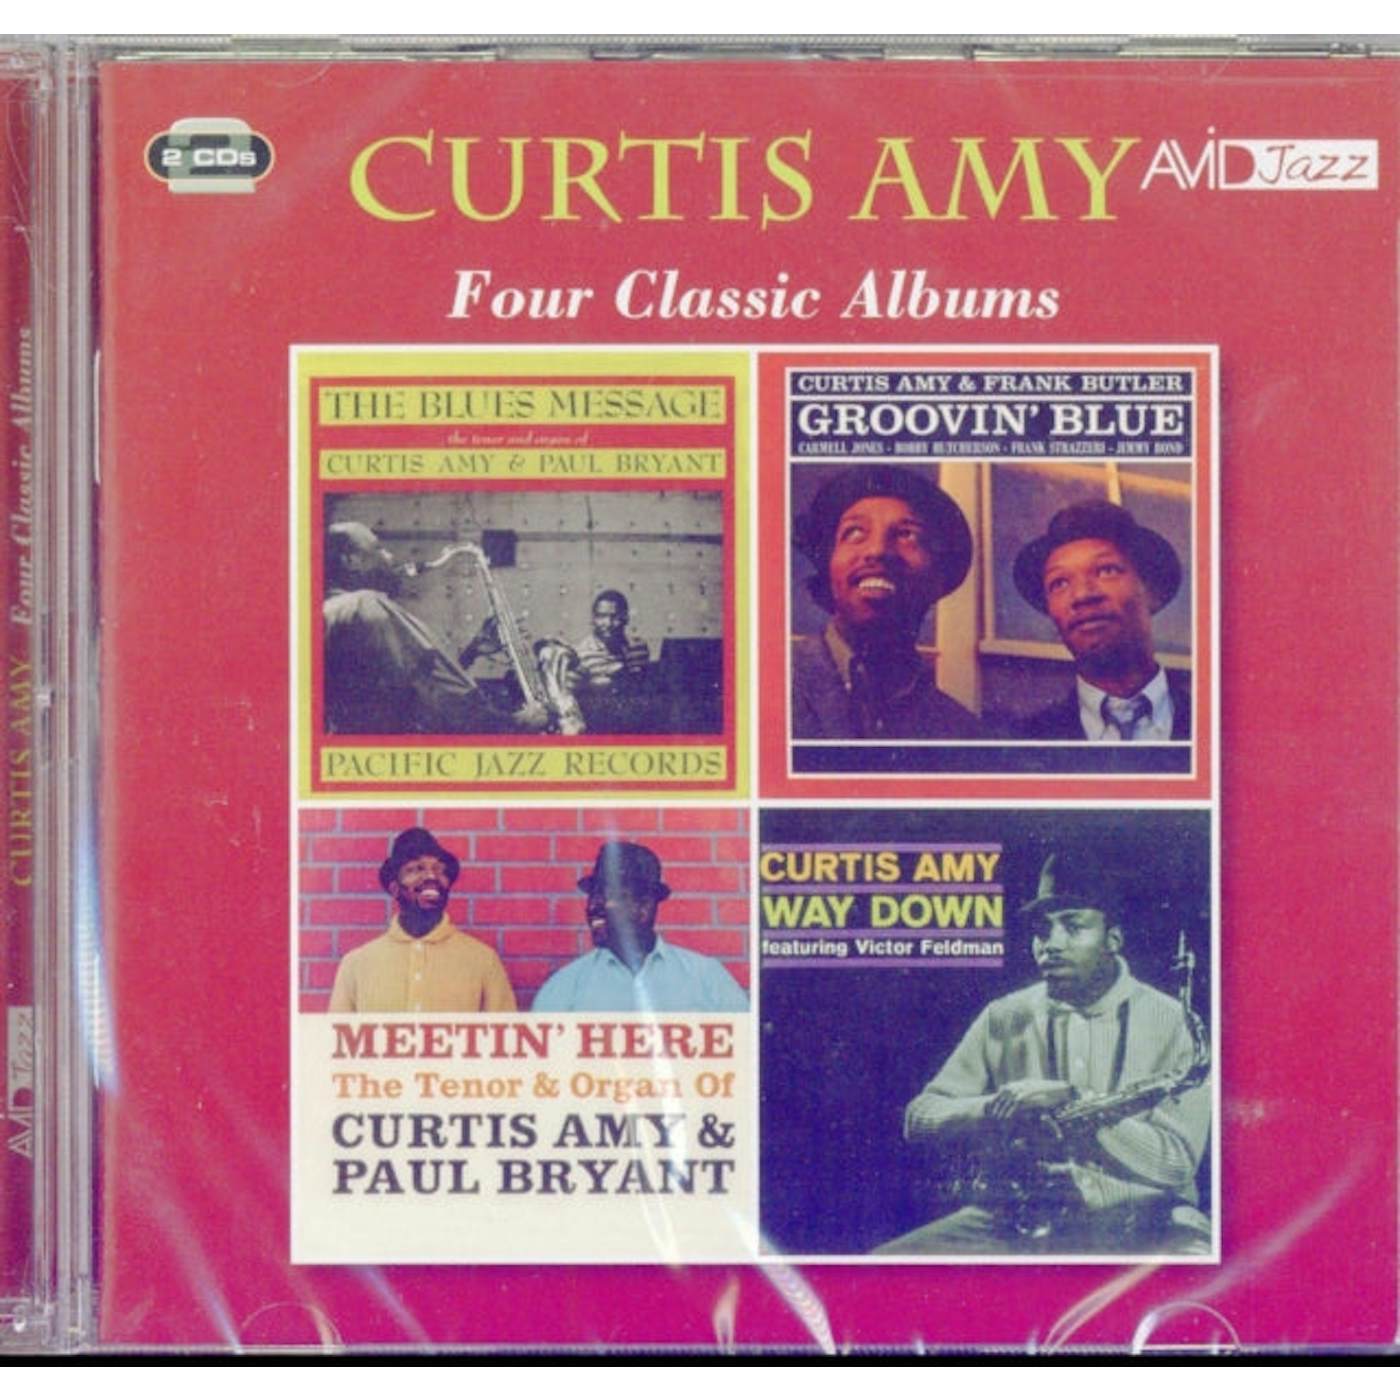 Curtis Amy CD - Four Classic Albums (The Blues Message / Groovin' Blue / Meetin' Here / Way Down)